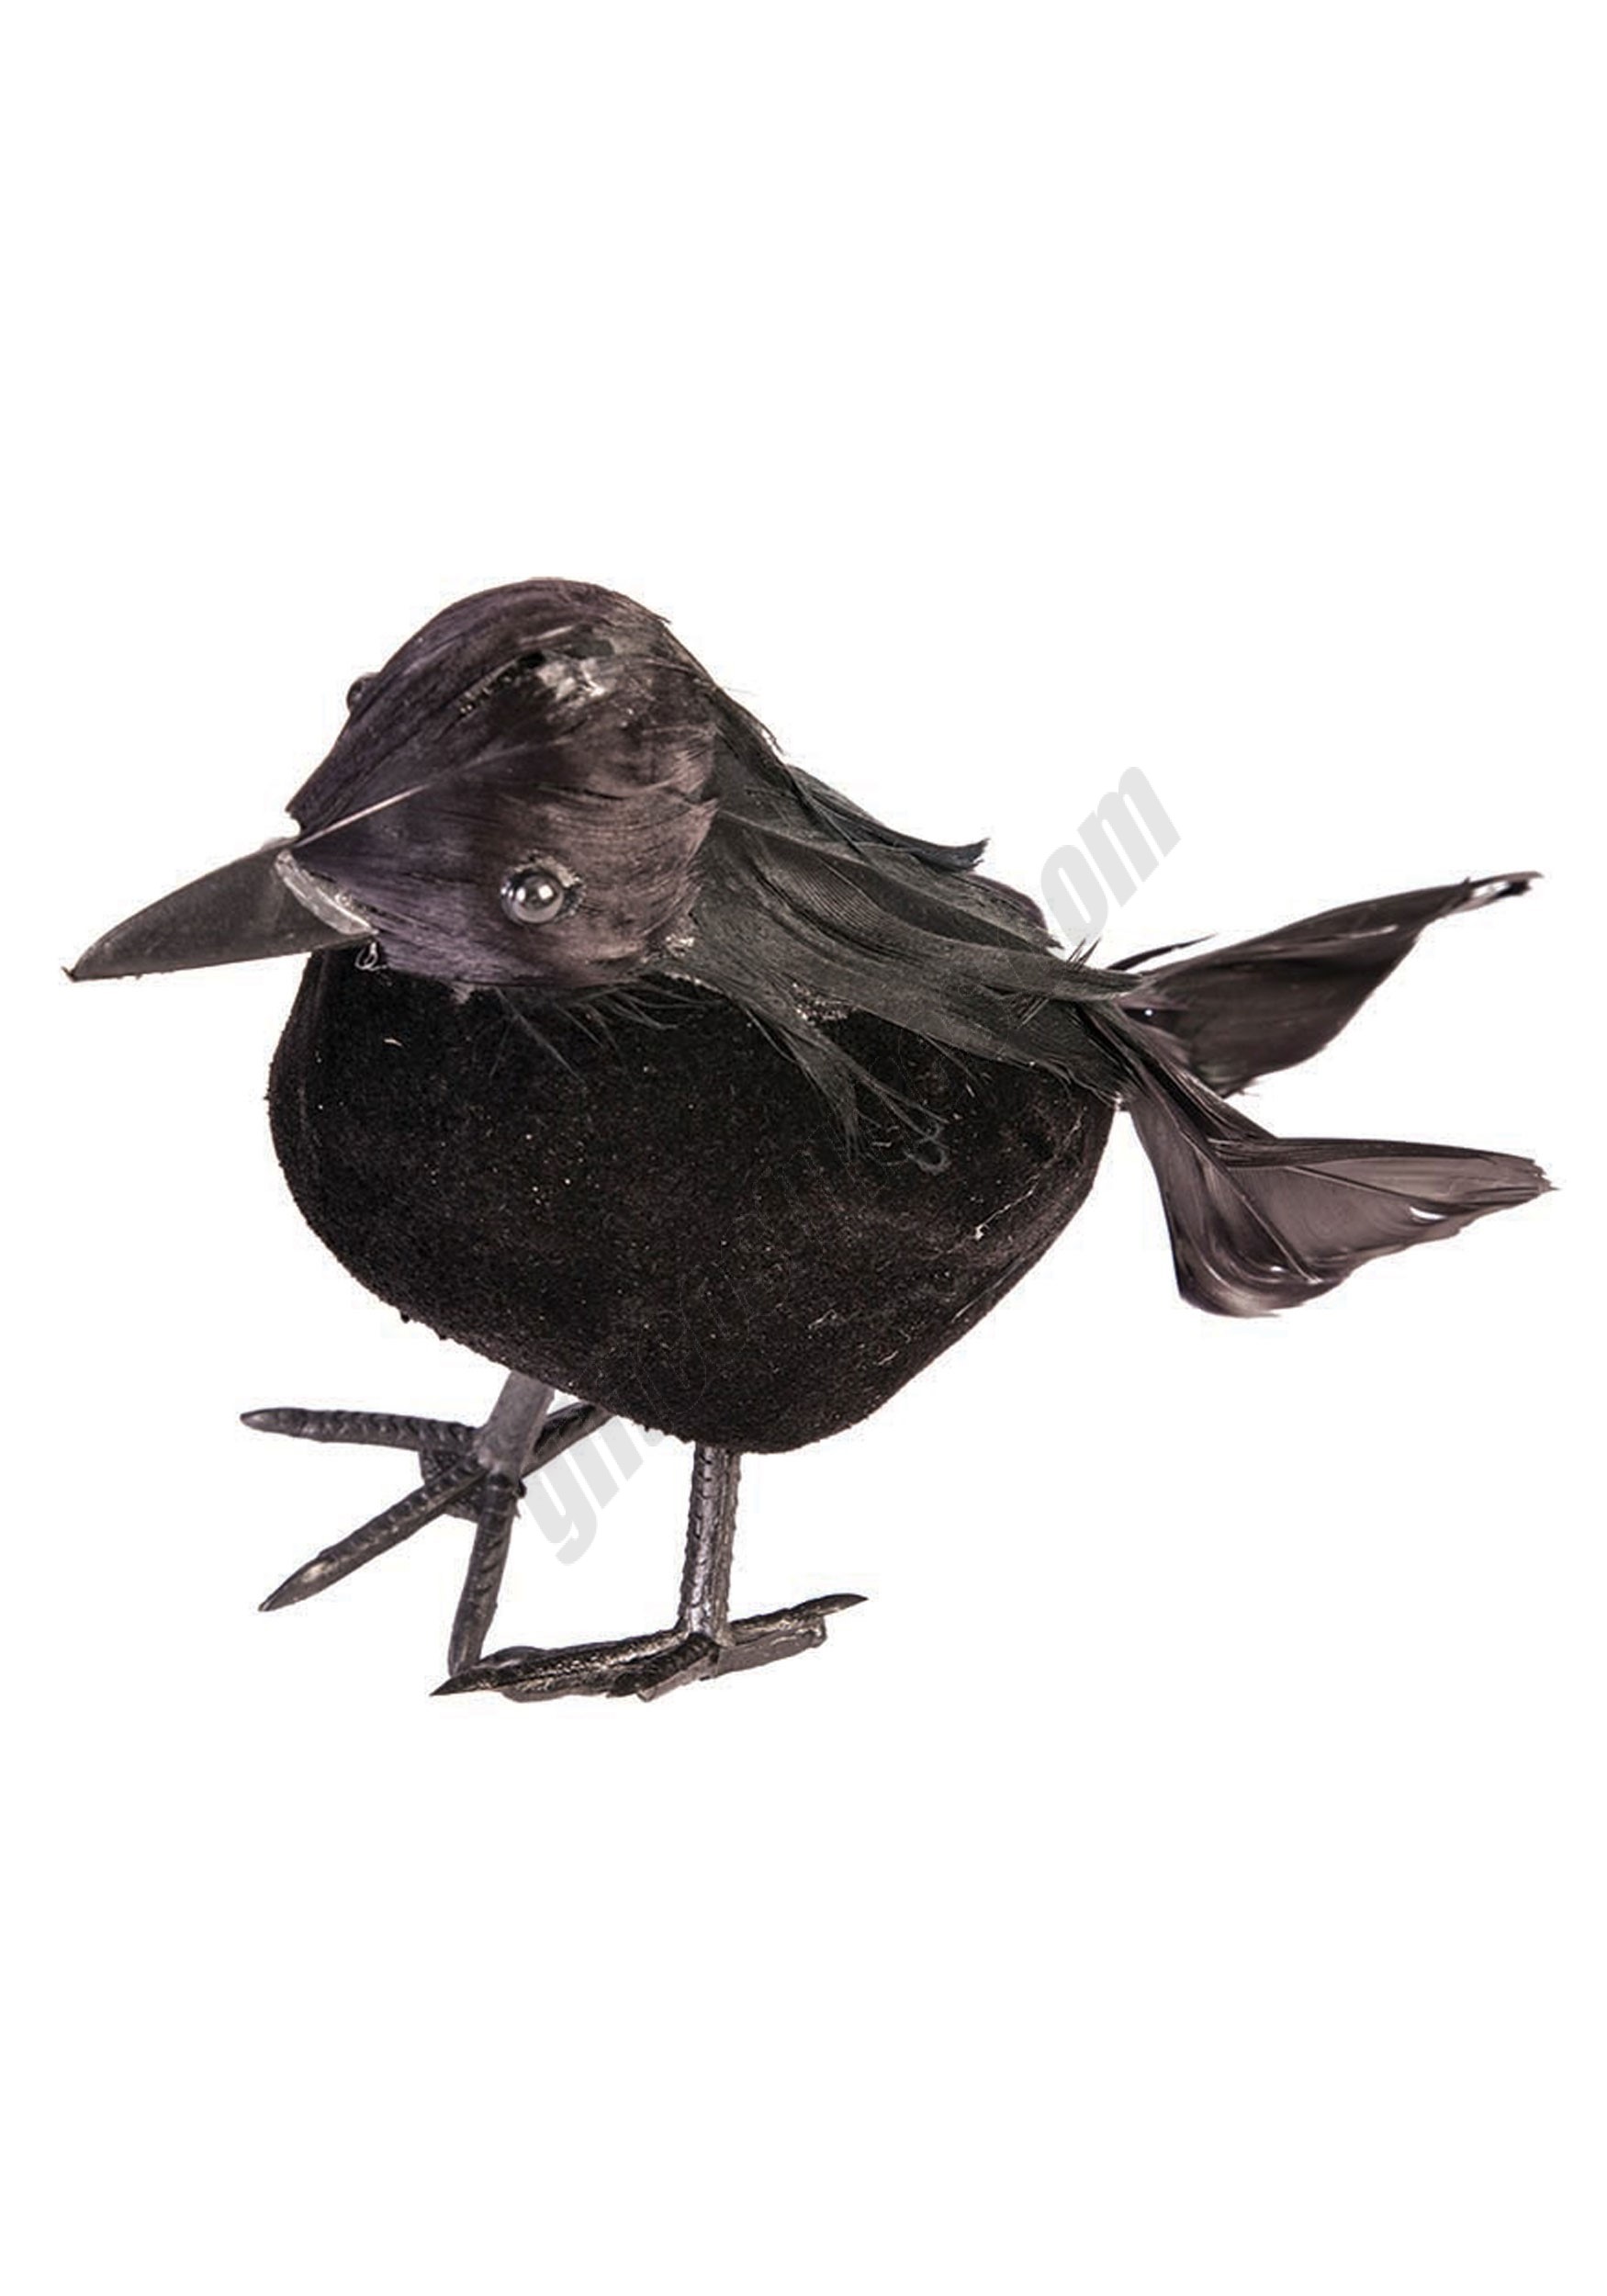 Black Crow - 5 Inches Tall Promotions - Black Crow - 5 Inches Tall Promotions